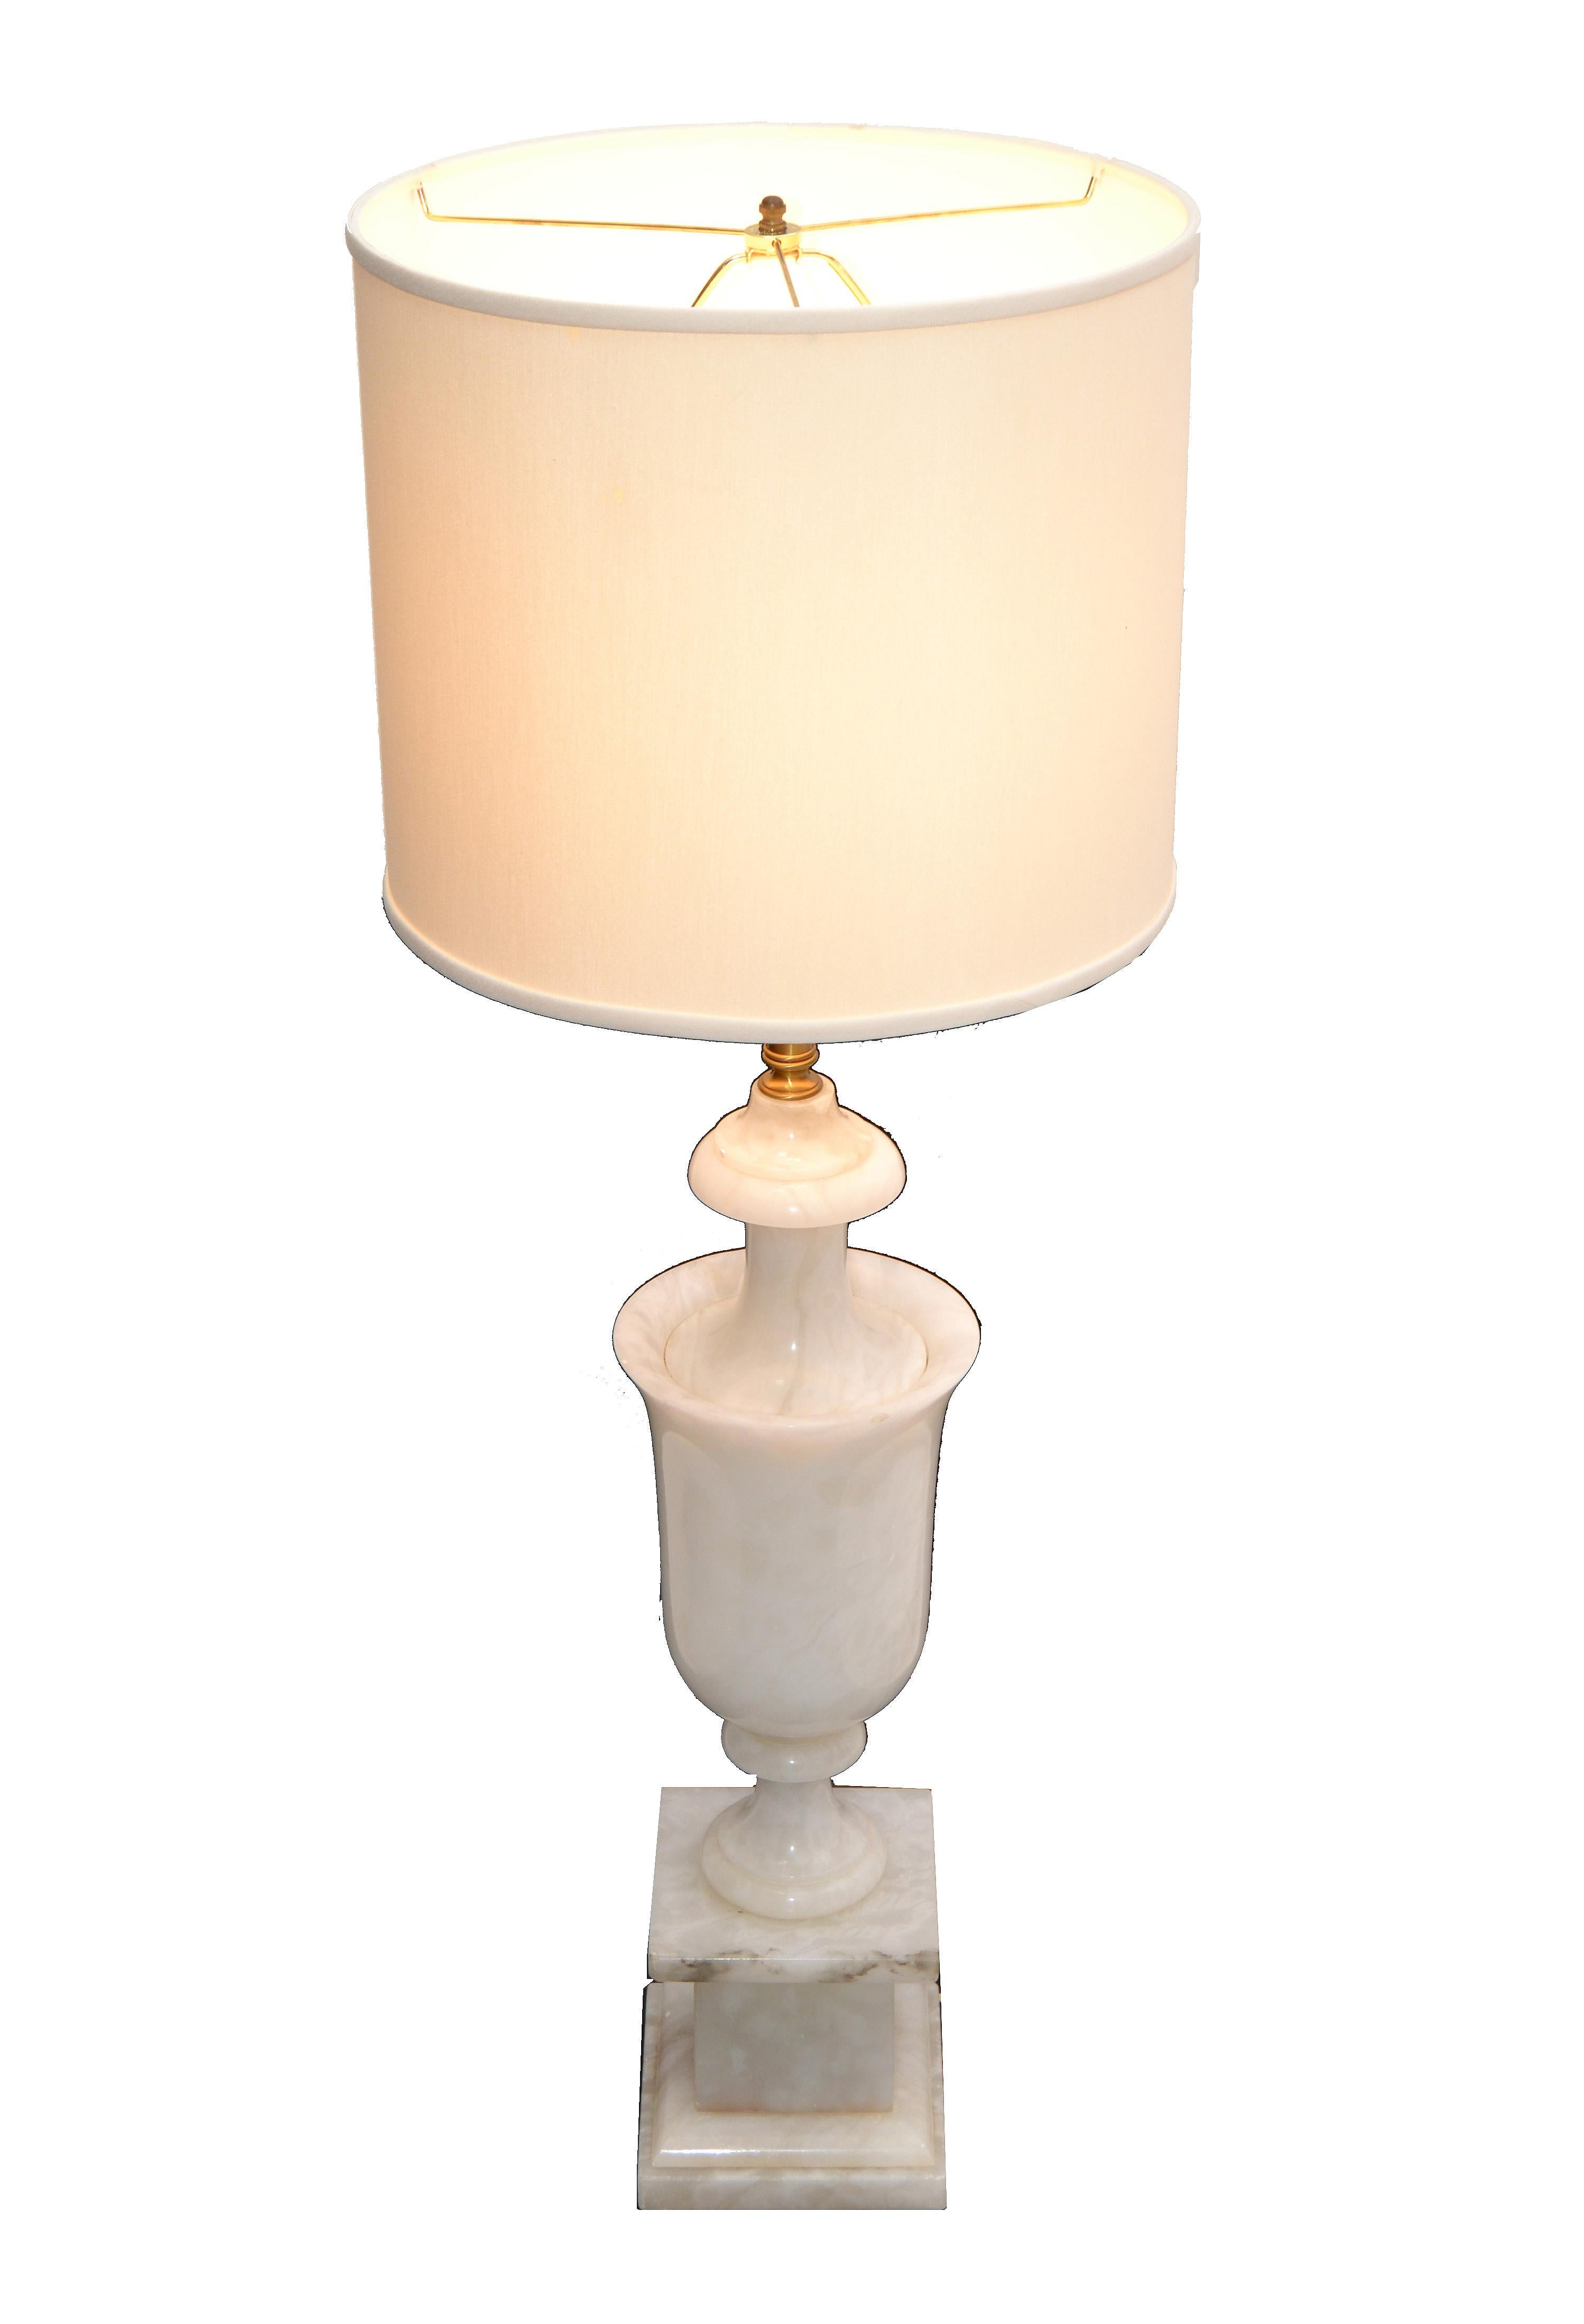 Mid-20th Century Art Deco Italian White Carrara Marble Hand Carved Table Lamp For Sale